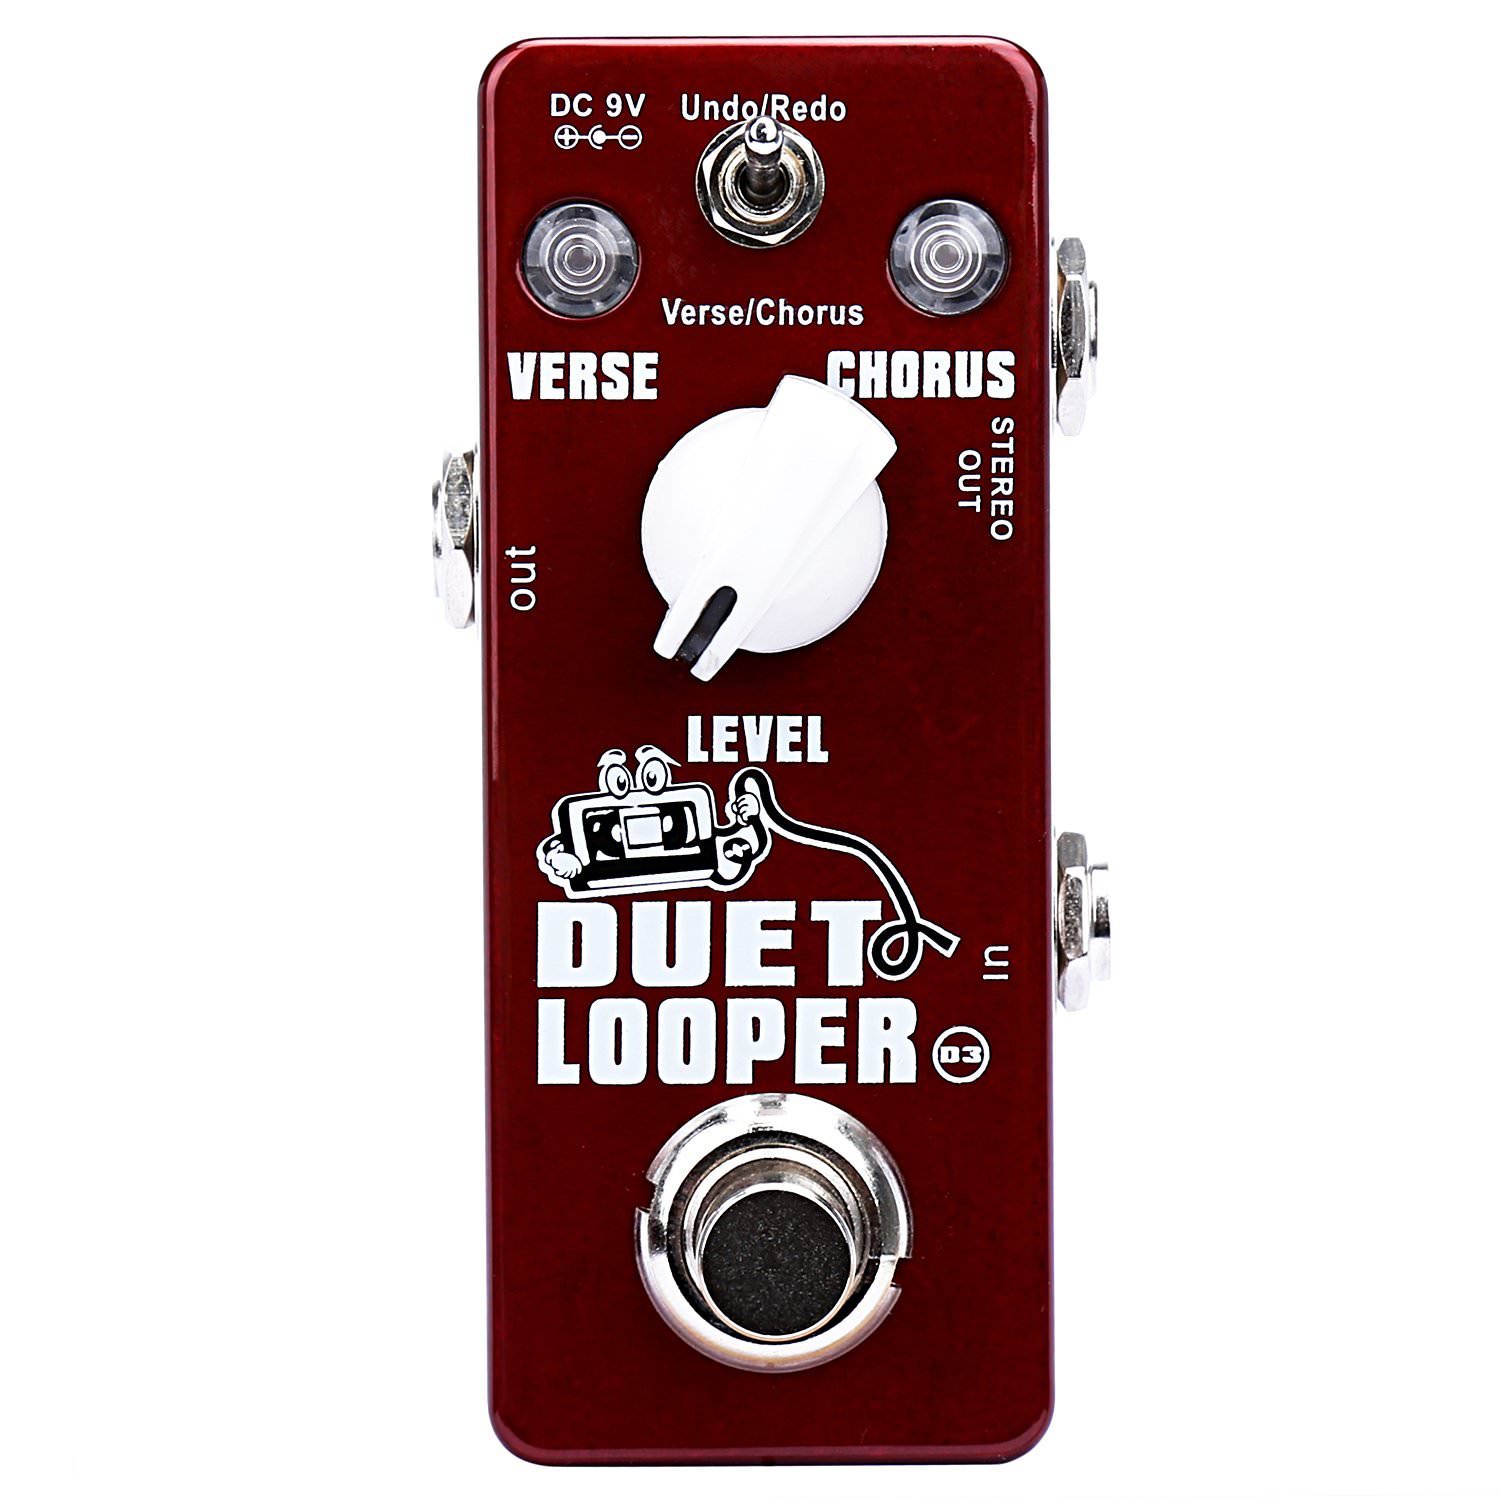 Xvive Duet Looper Stereo Dual Channel Loop Station Effects Pedal for Guitar Bass First Look Review